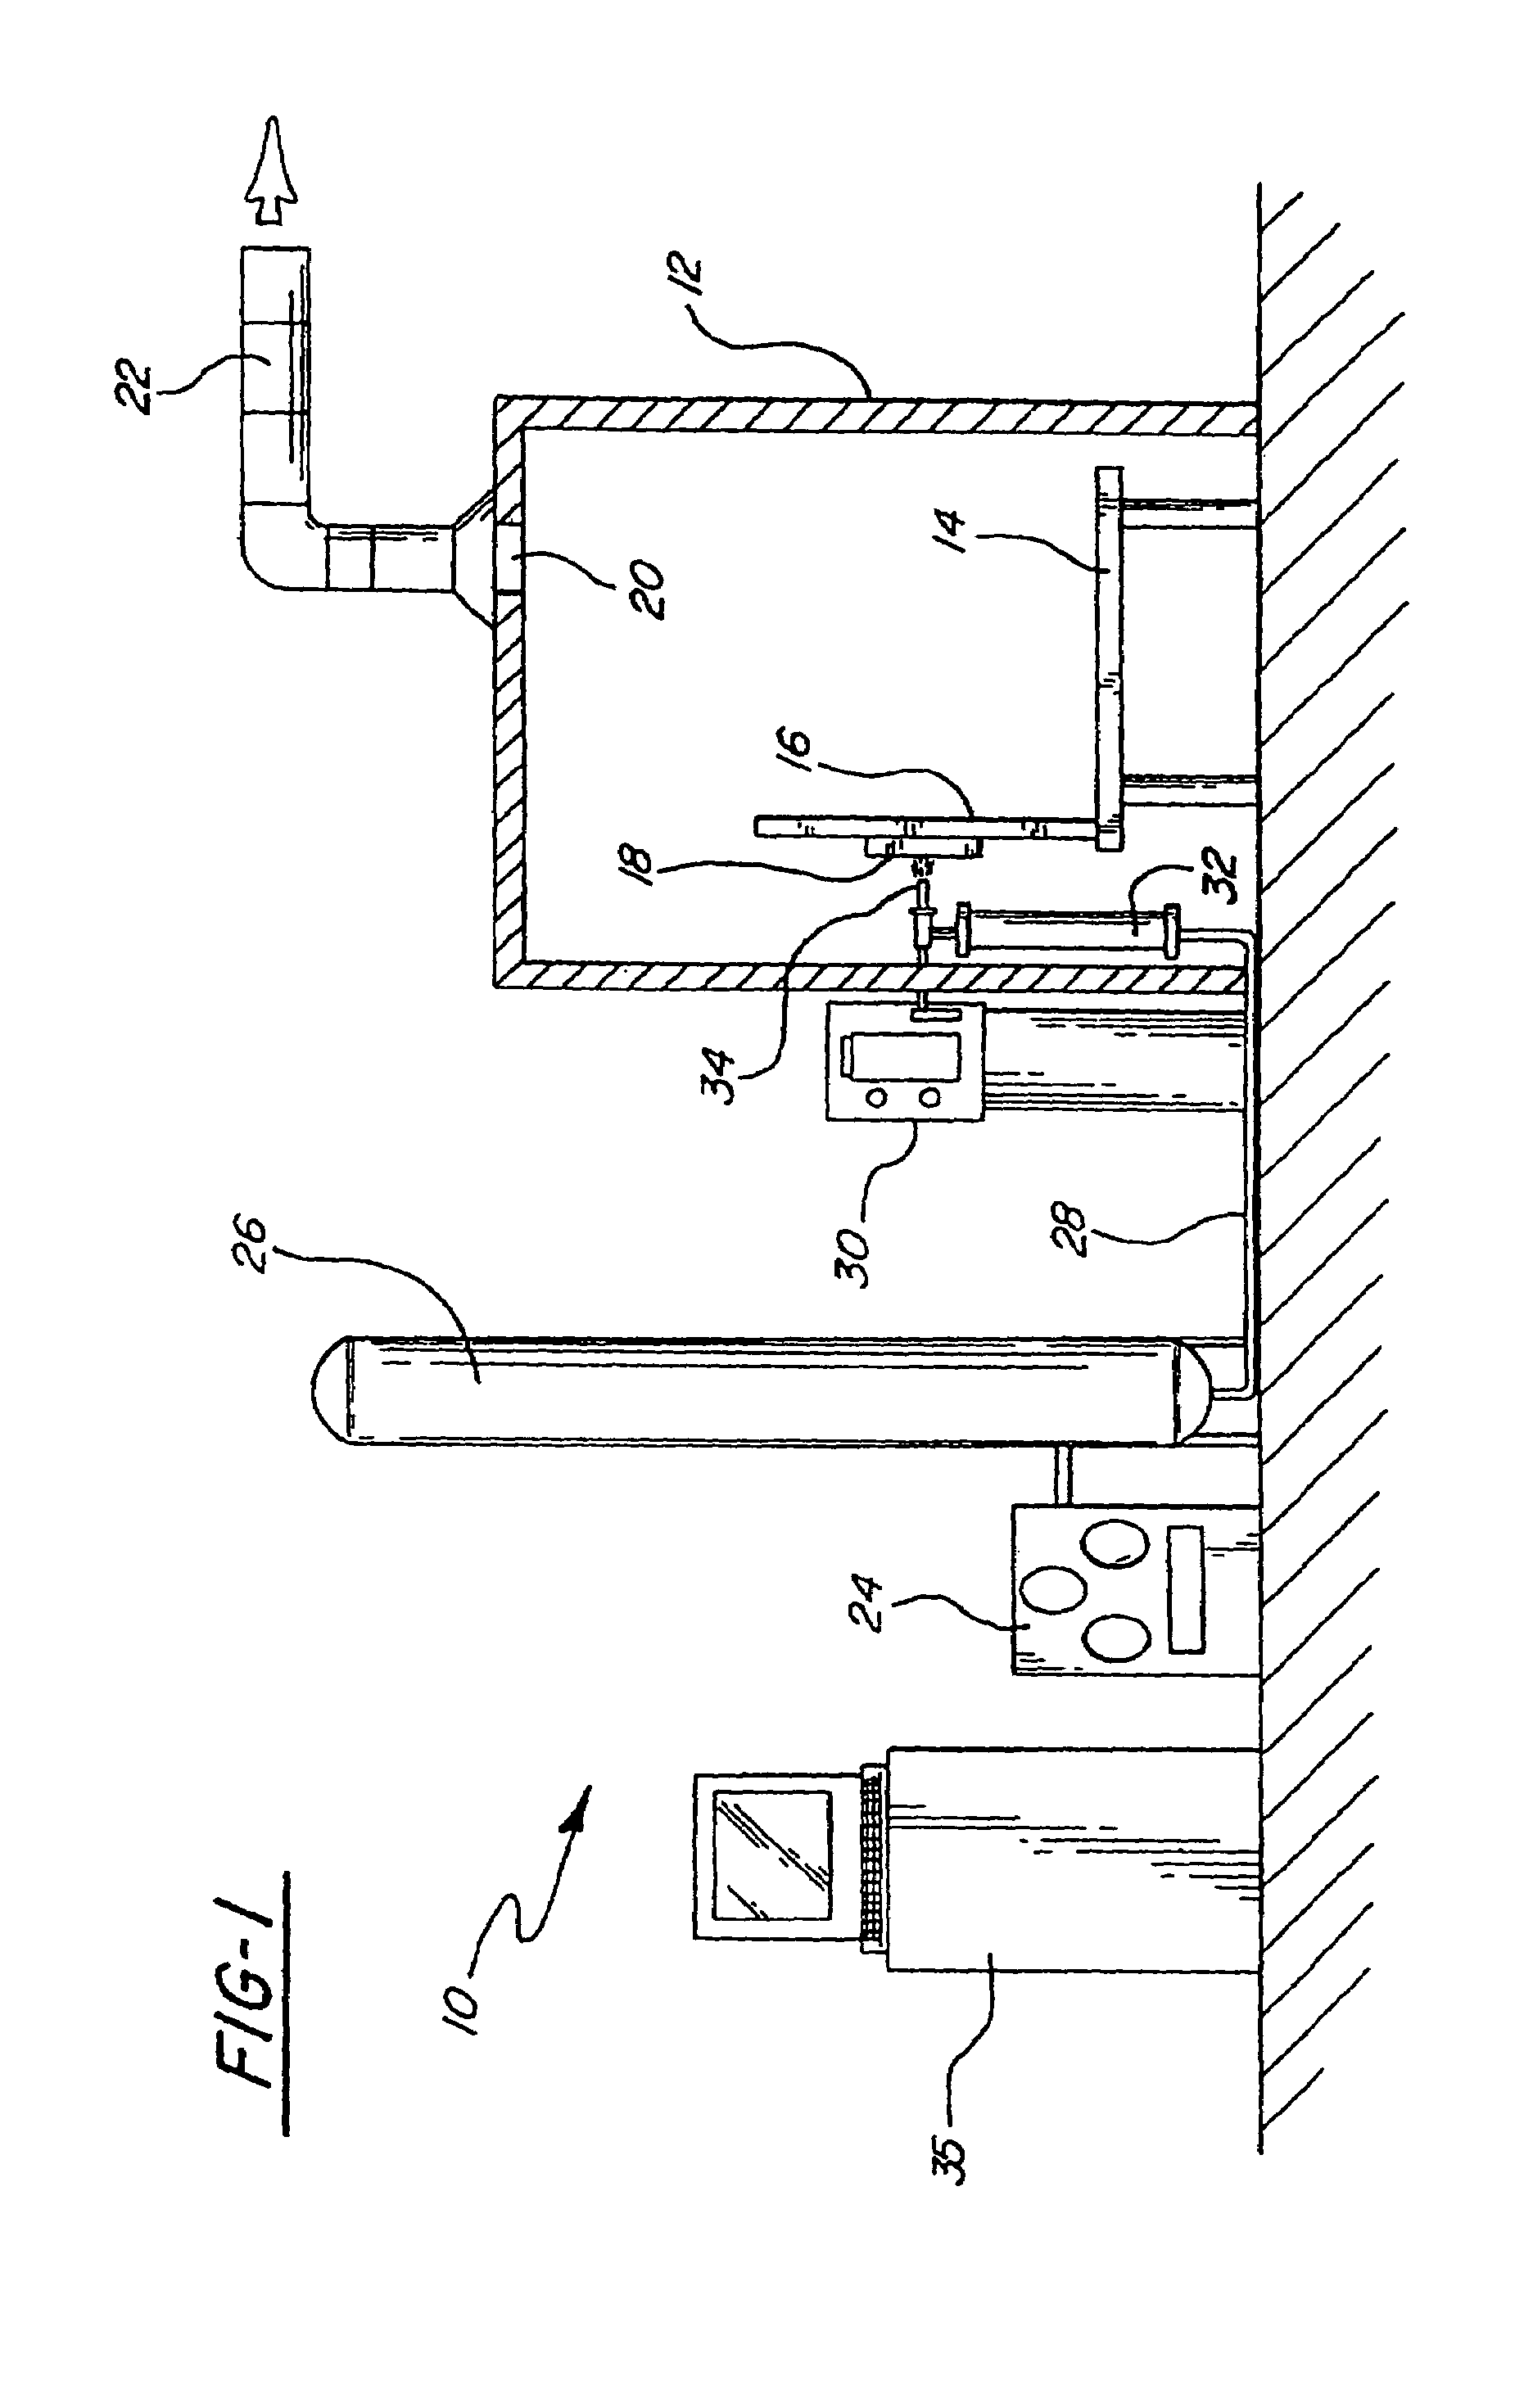 Method for securing ceramic structures and forming electrical connections on the same